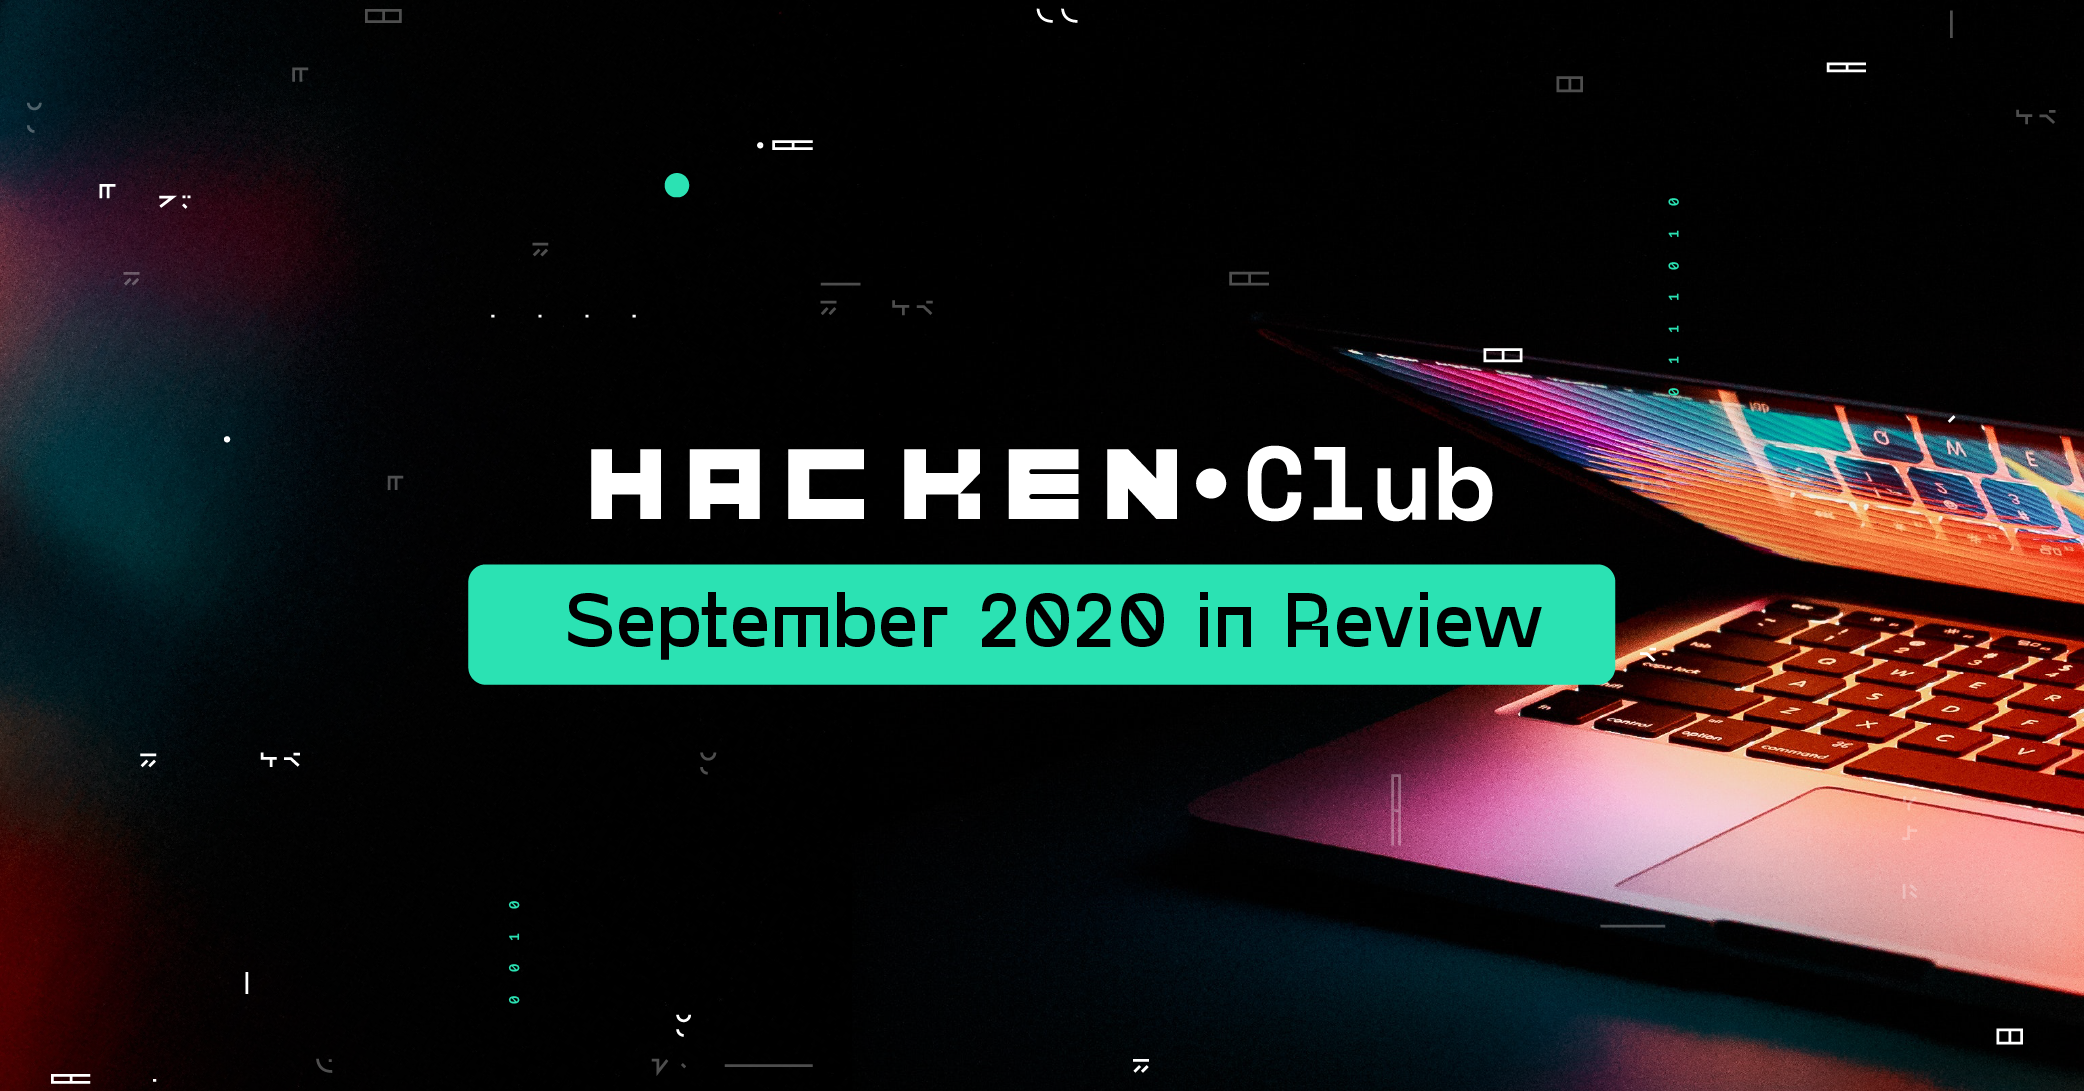 The most important Hacken News in September 2020 Review